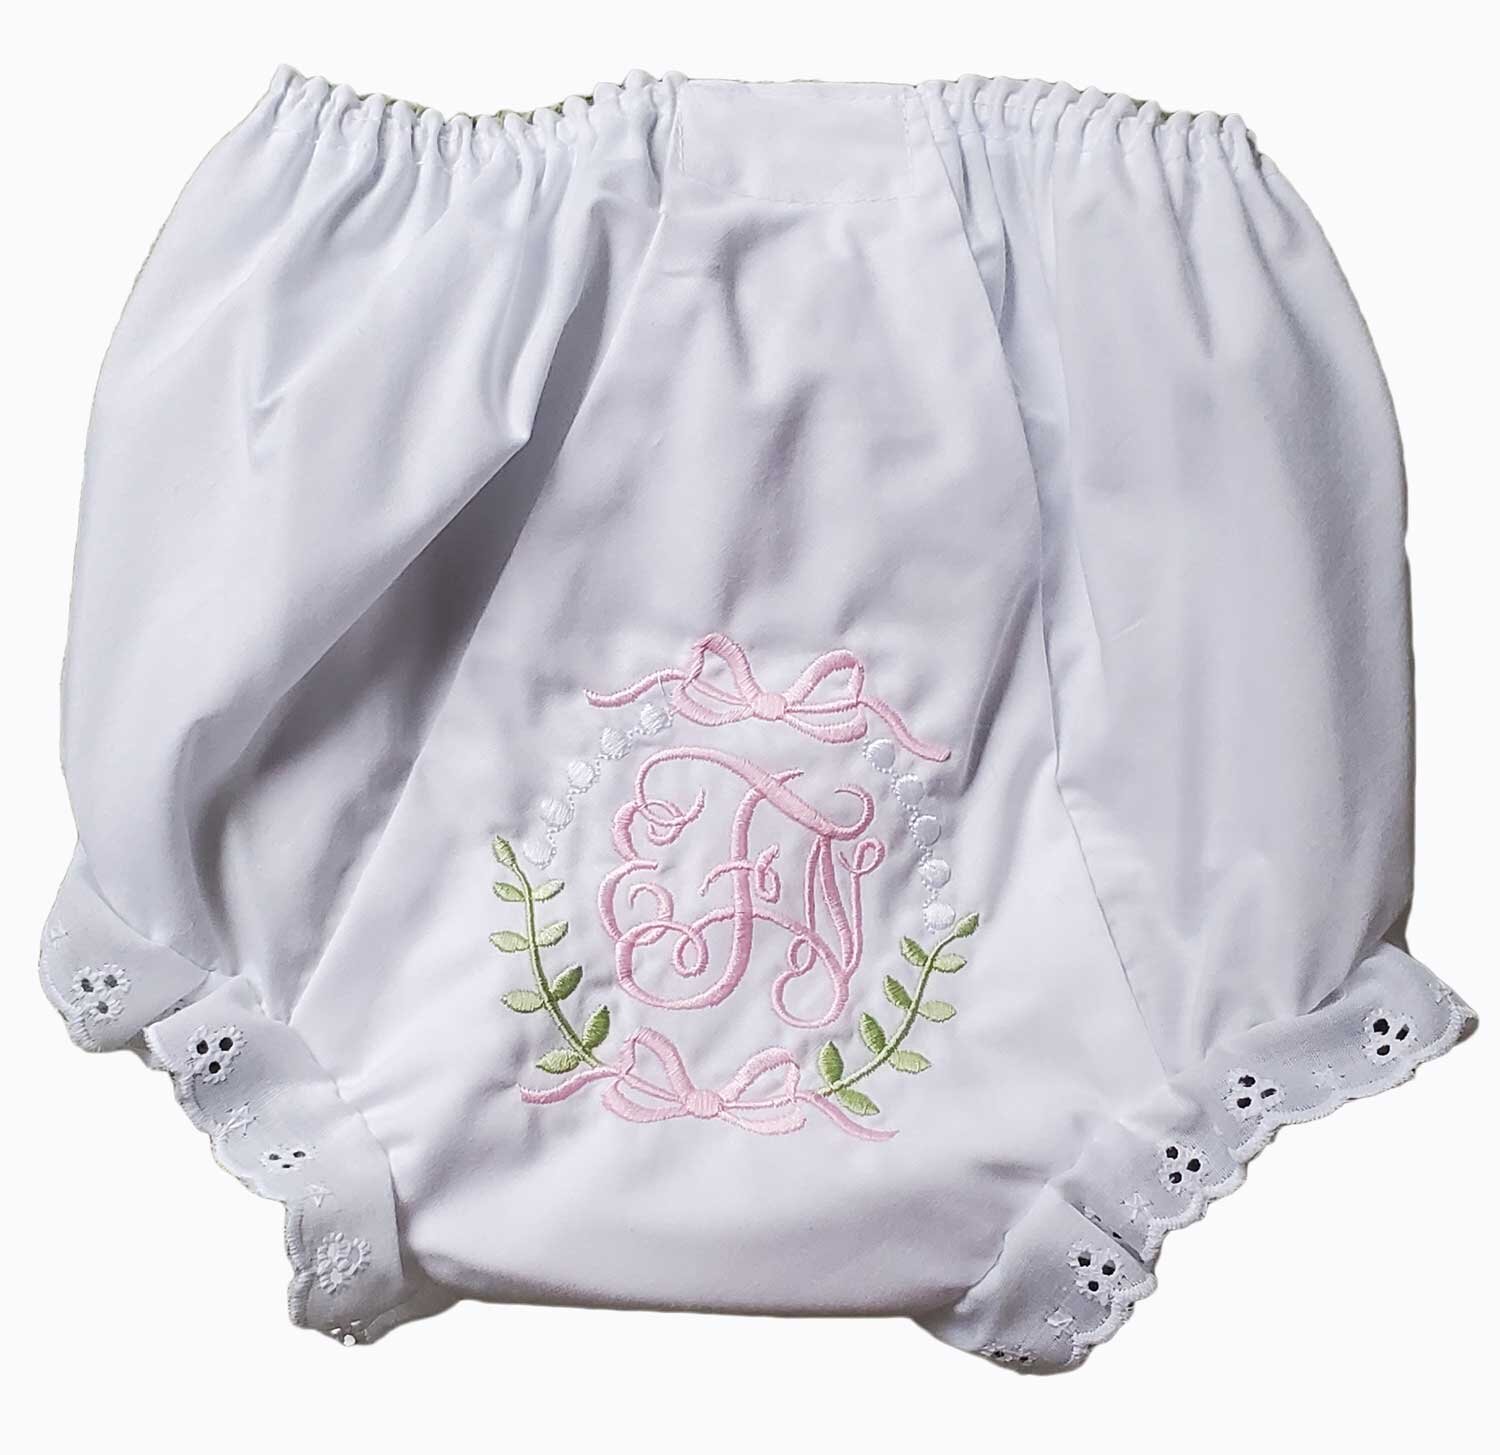 Diaper Cover Monogrammed White Eyelet Bloomers Diaper Cover Font Design Baby Girls Personalized Gift Baby Shower Gift Newborn Gift